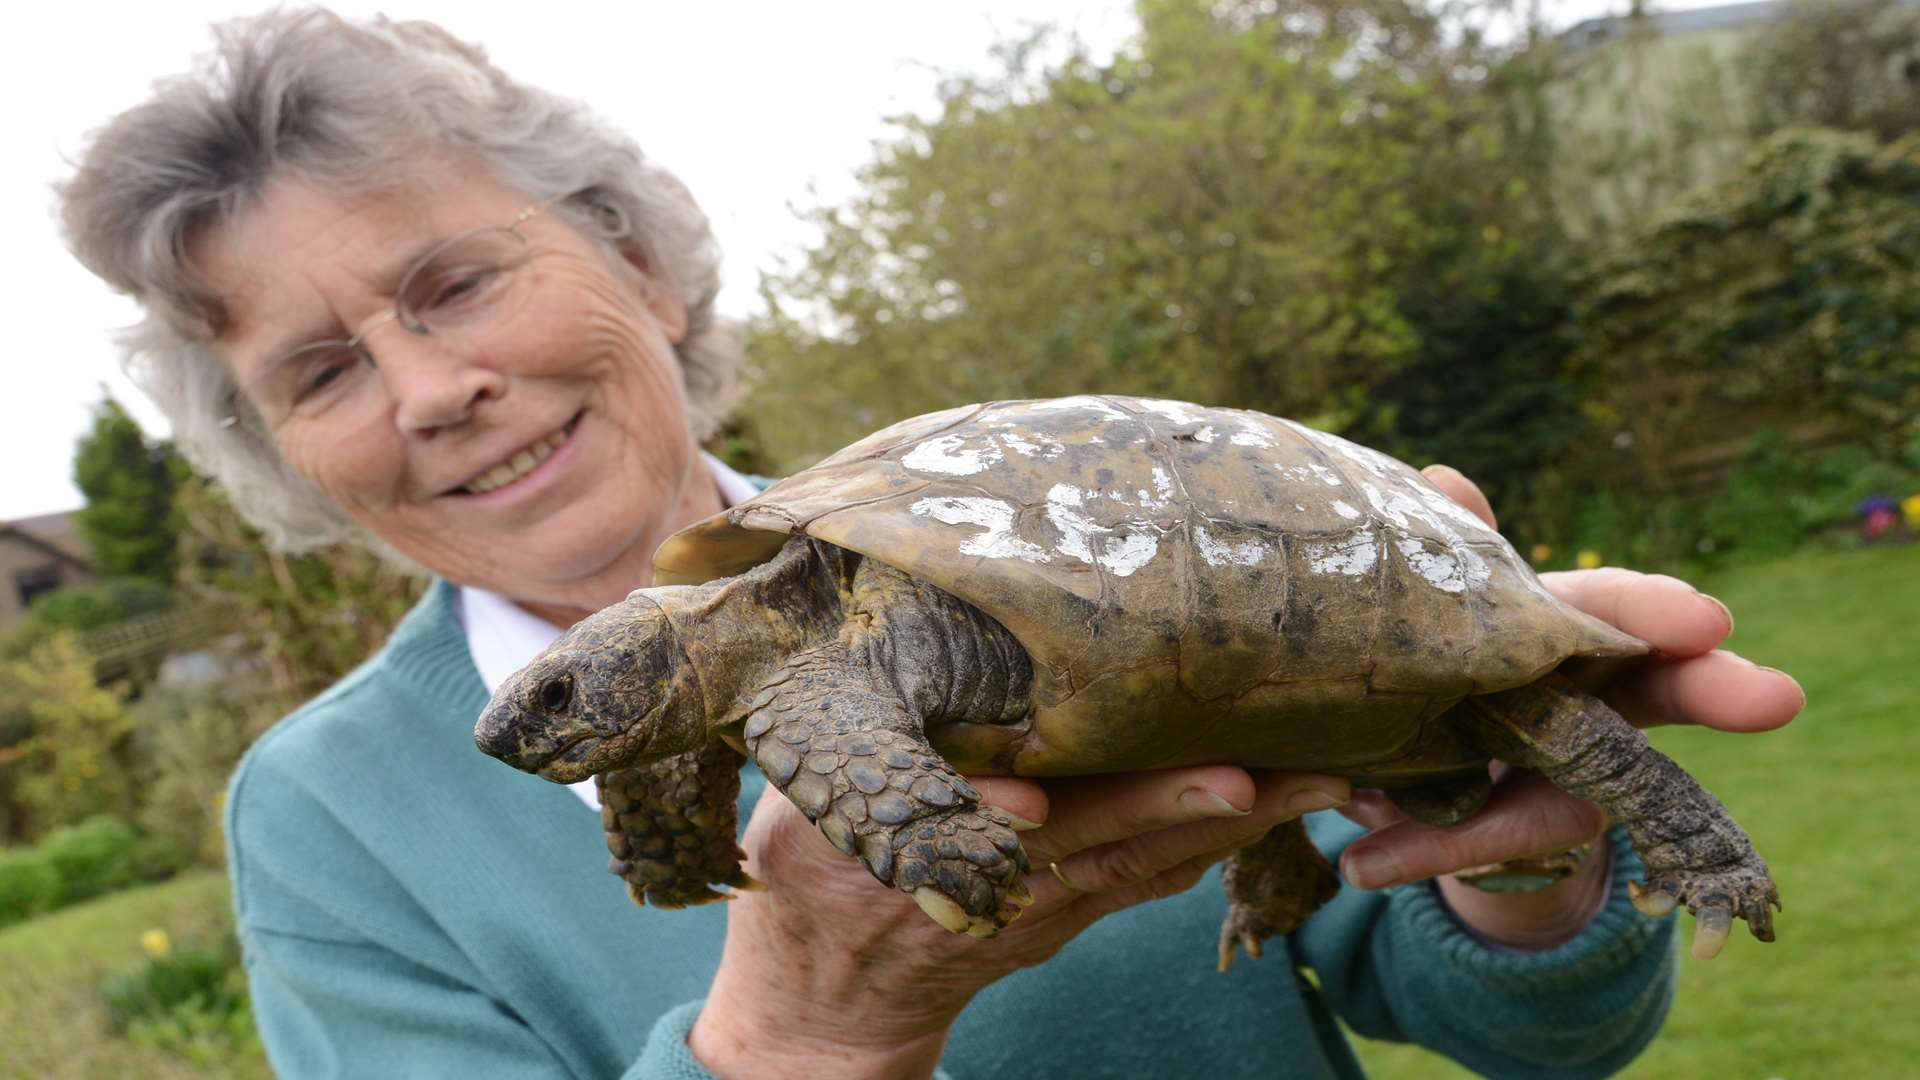 Wendy Stokes has been reunited with Toby the tortoise